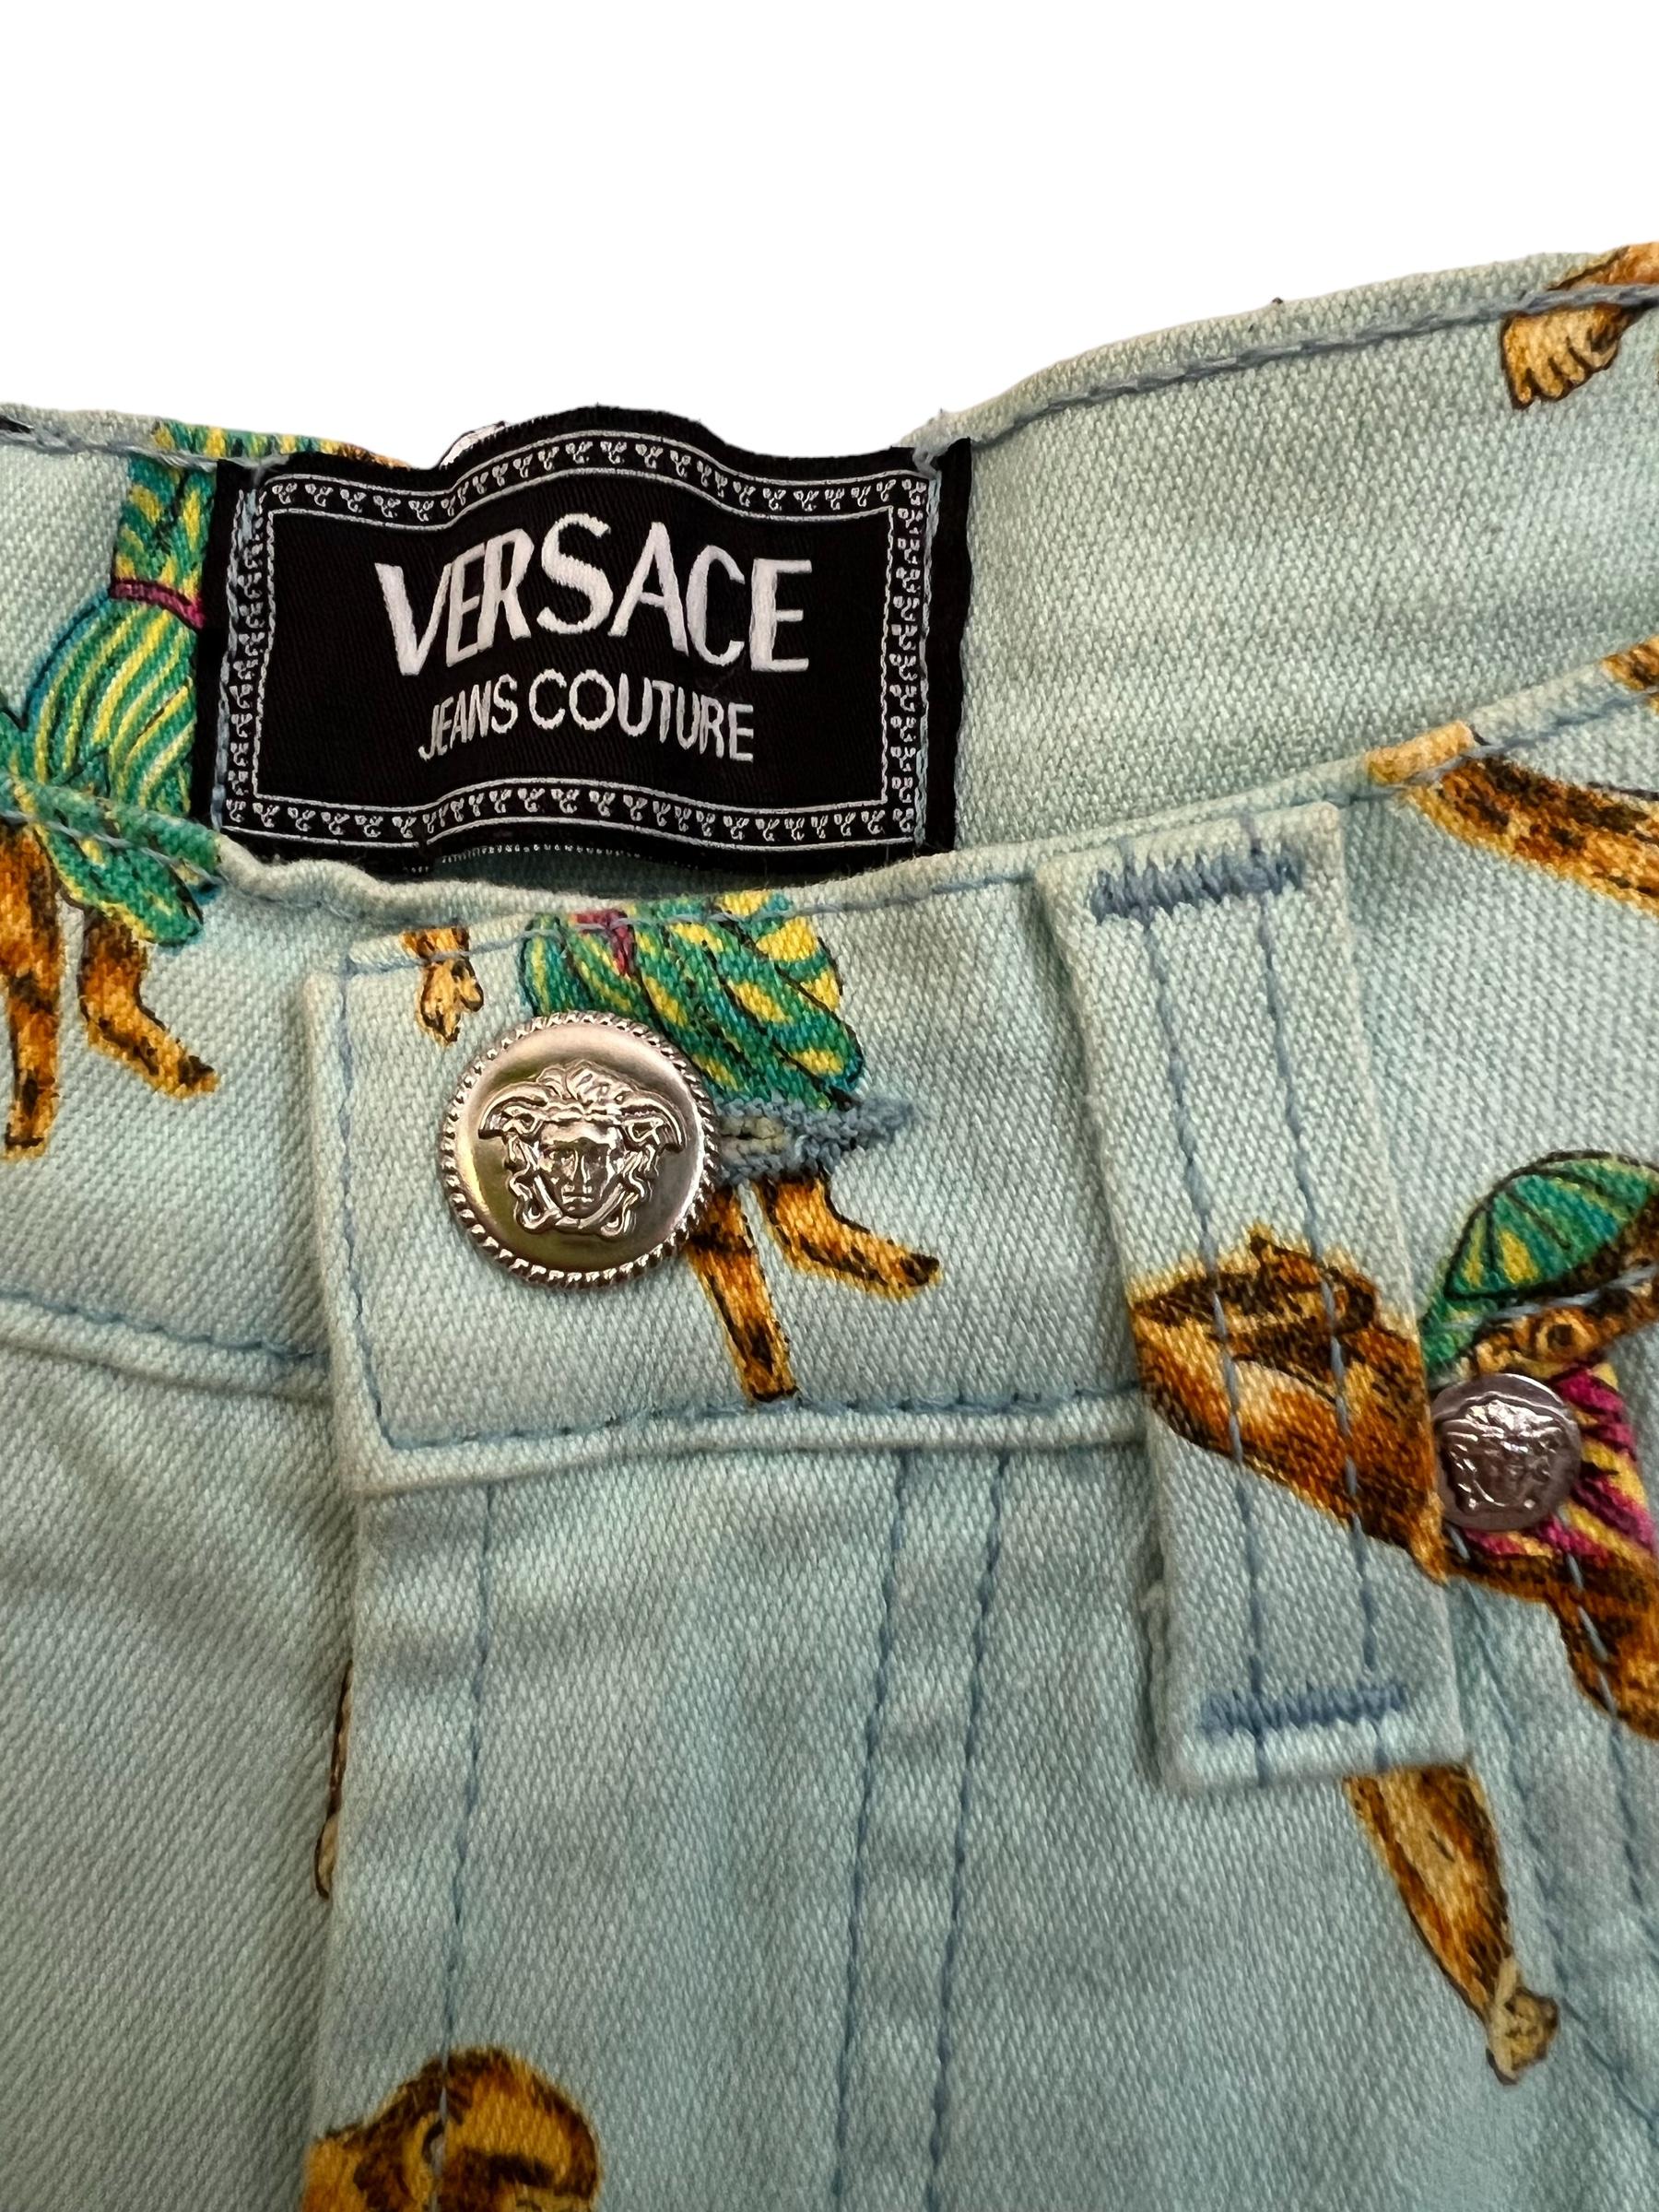 Fun 1990's Gianni Versace High waisted Colourful Monkey Cartoon pattern Jeans For Sale 4